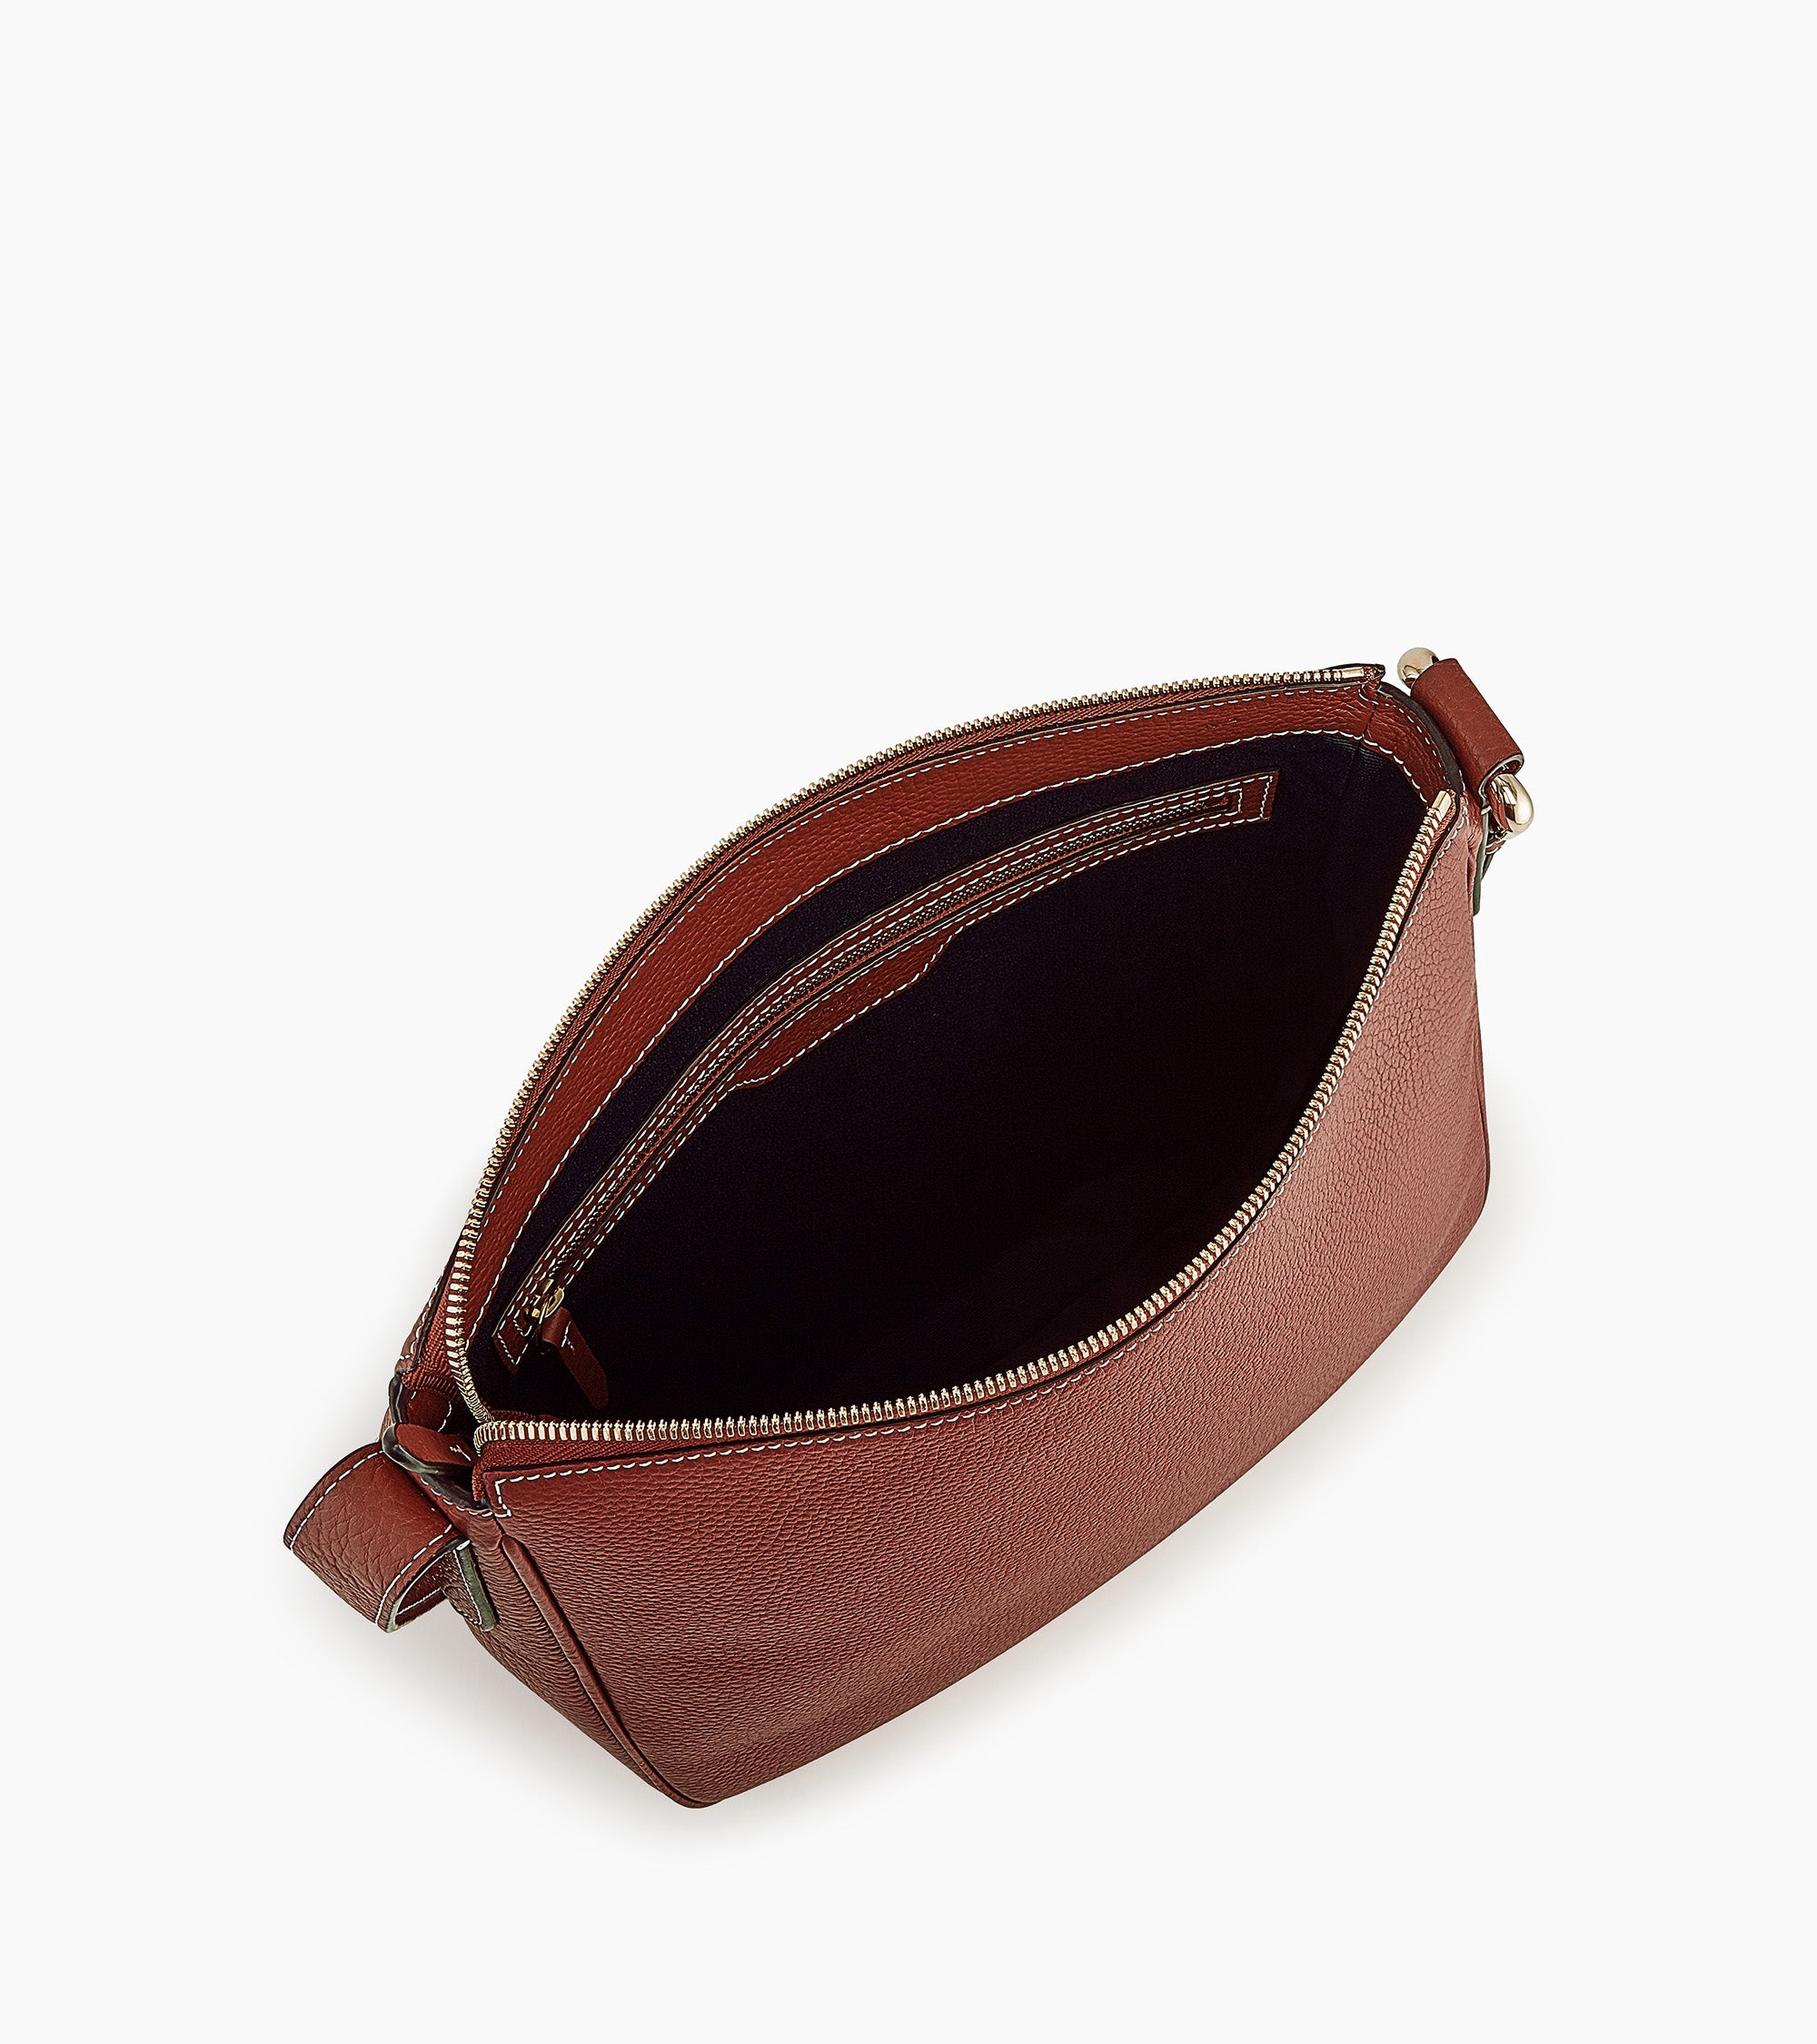 Madeleine mid-sized hobo bag in grained leather